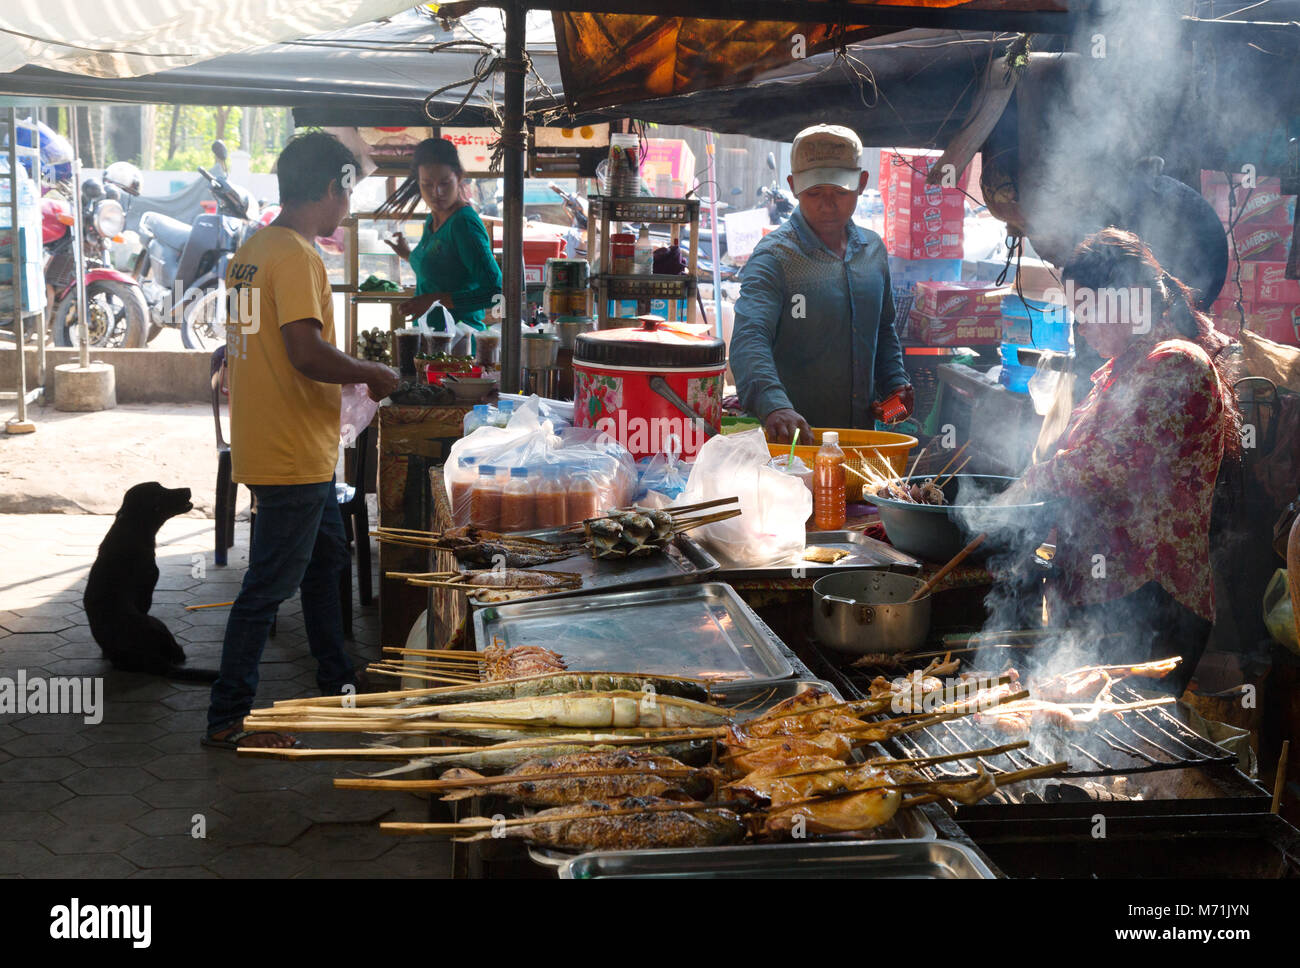 Stallholder cooking fish on the grill, Kep Crab market, Kep, Kampot province, Cambodia Asia Stock Photo